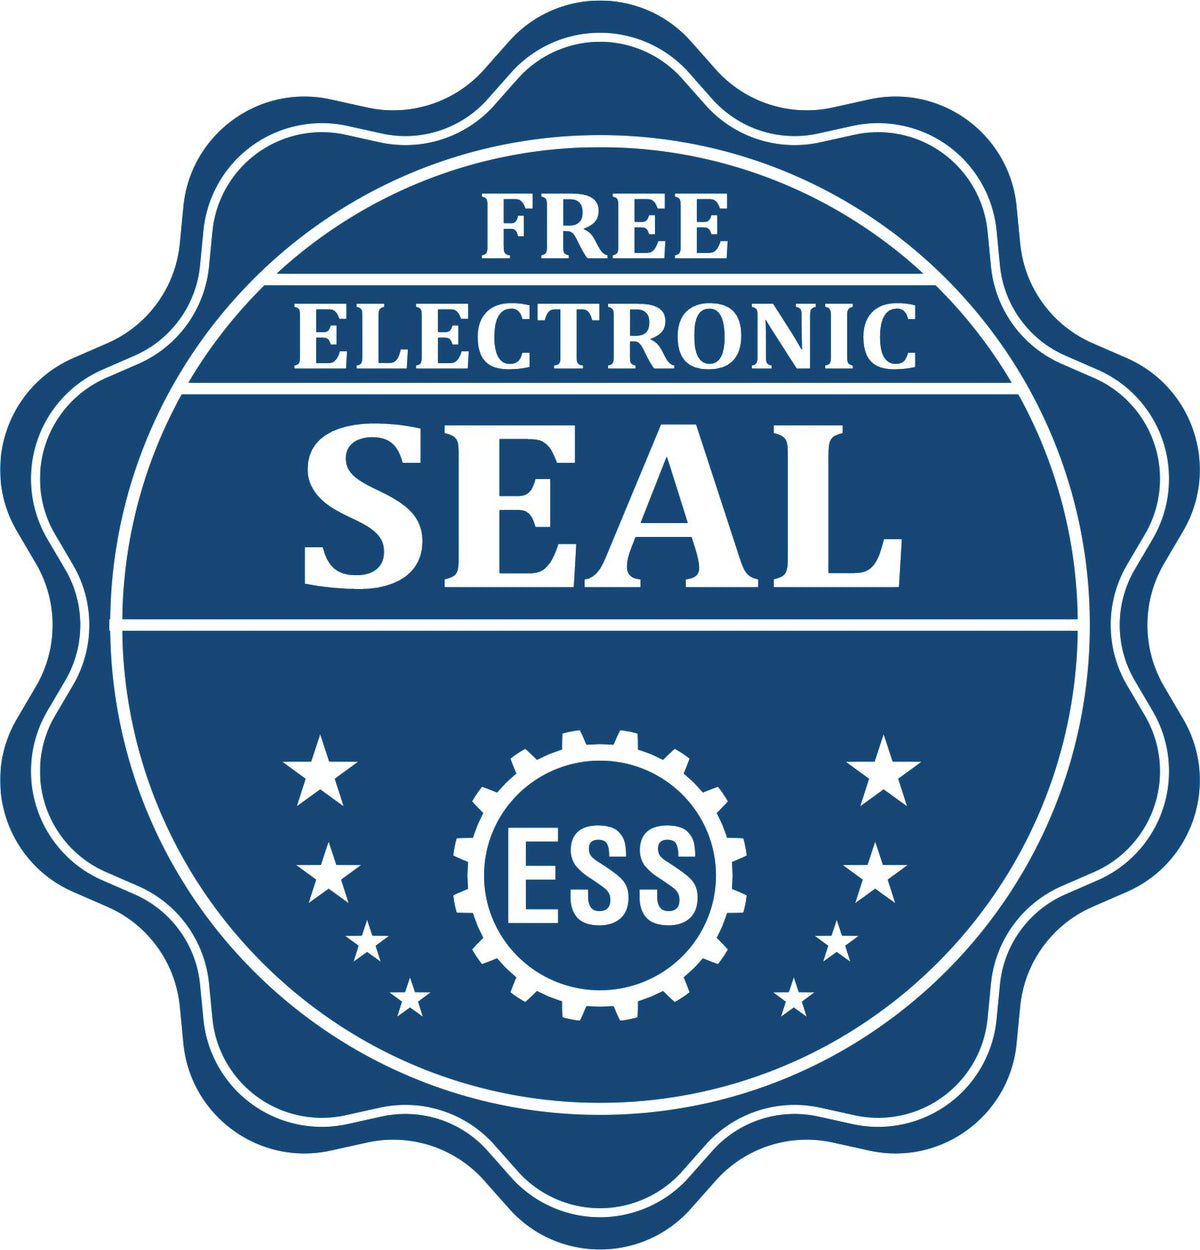 A badge showing a free electronic seal for the Heavy Duty Cast Iron Hawaii Land Surveyor Seal Embosser with stars and the ESS gear on the emblem.